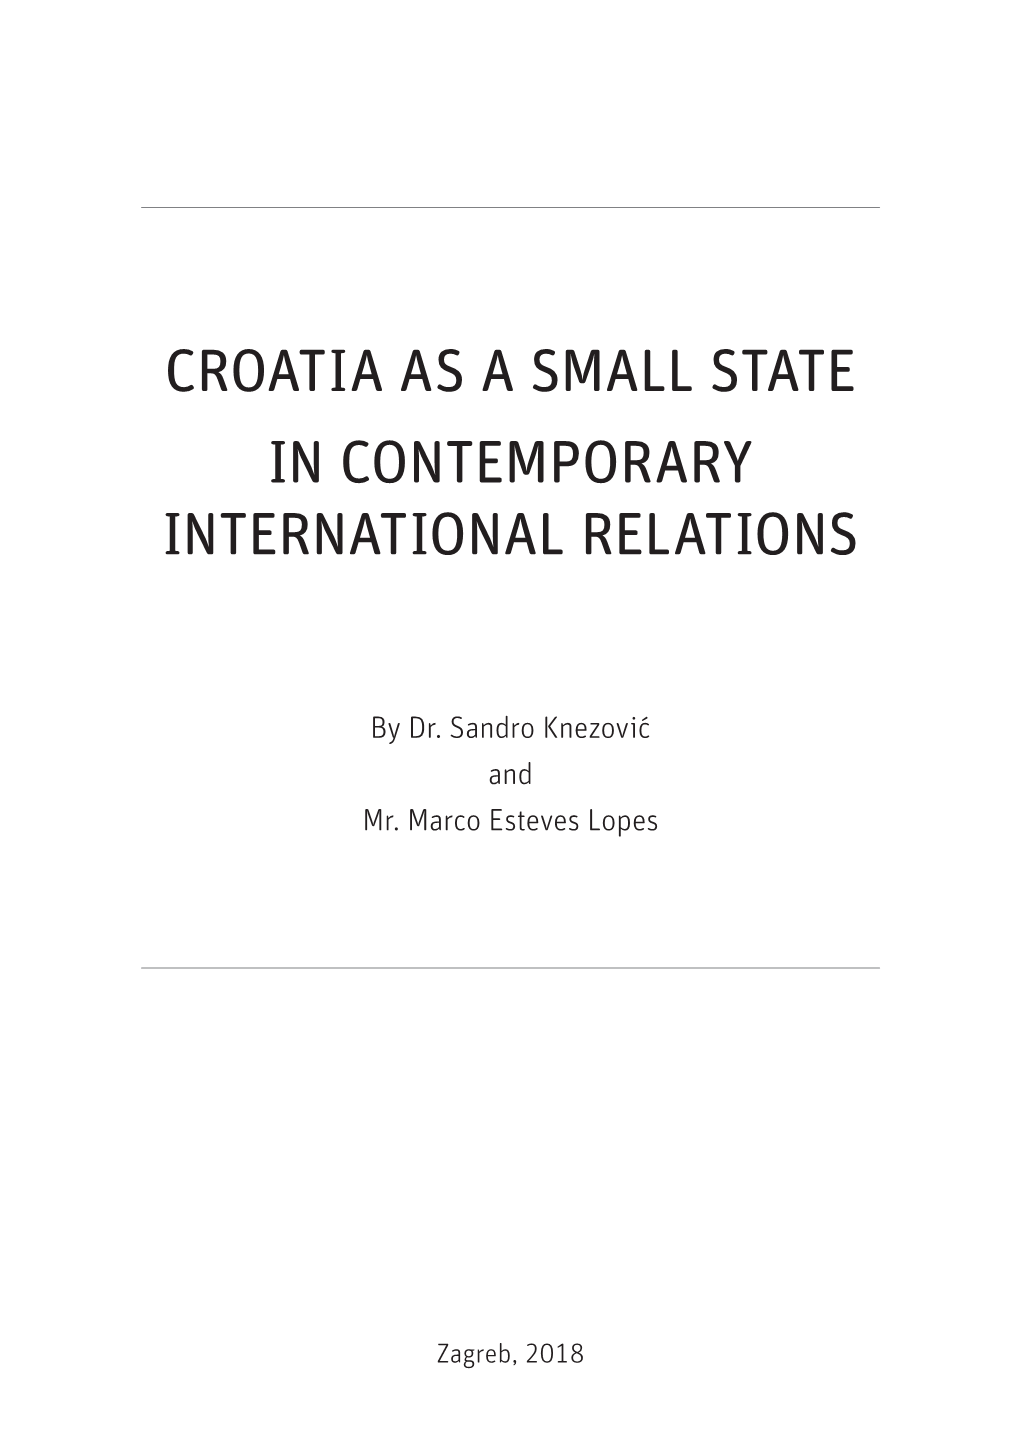 Croatia As a Small State in Contemporary International Relations